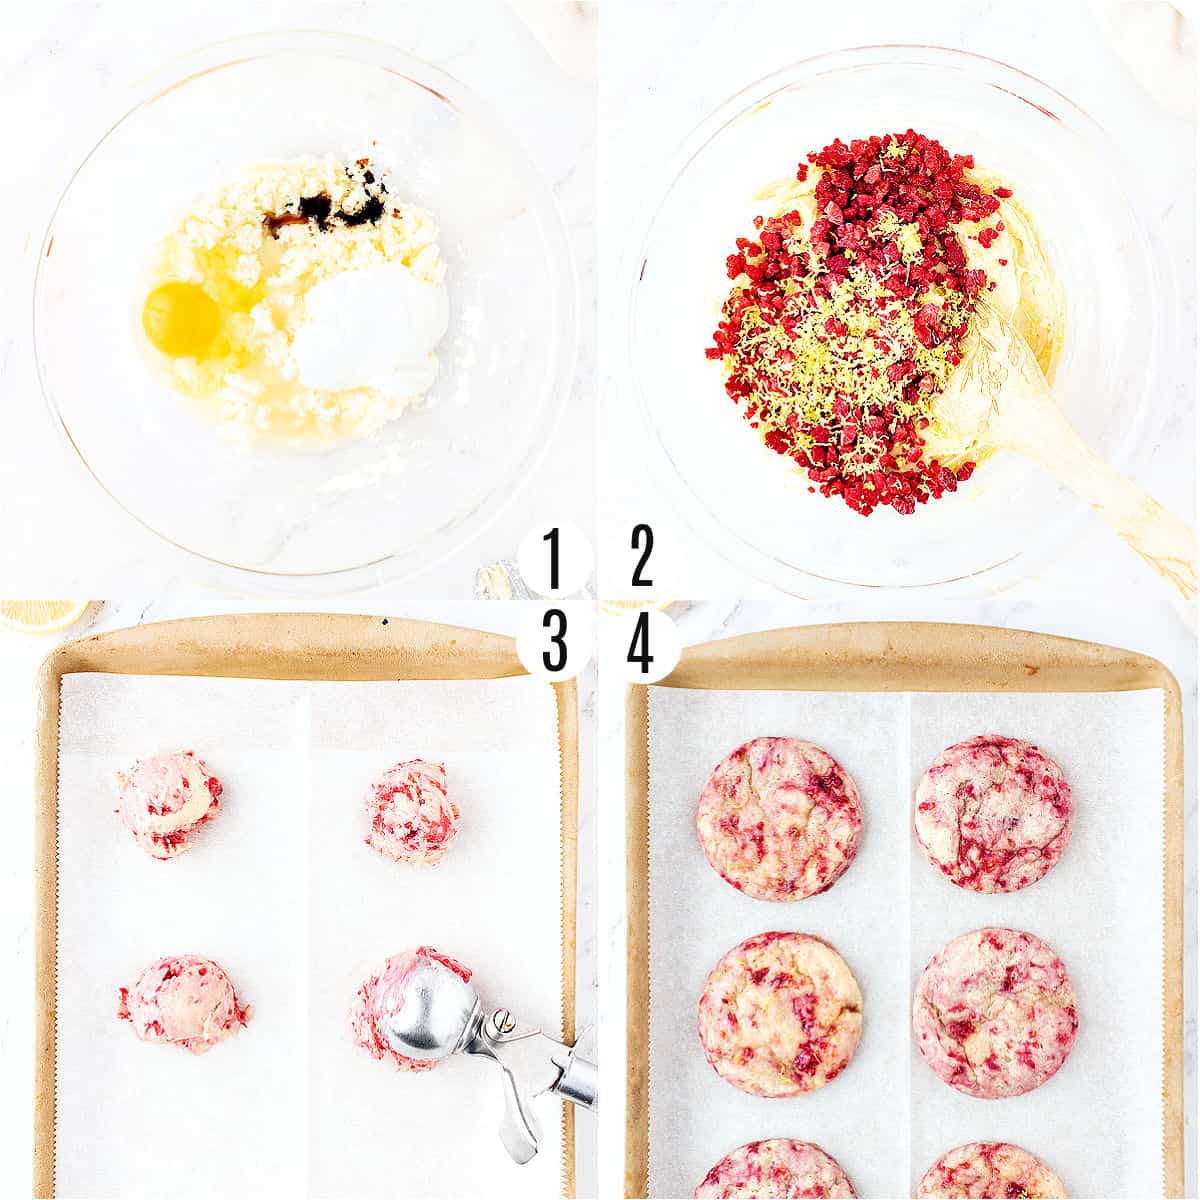 Step by step photos showing how to make raspberry lemonade cookies.